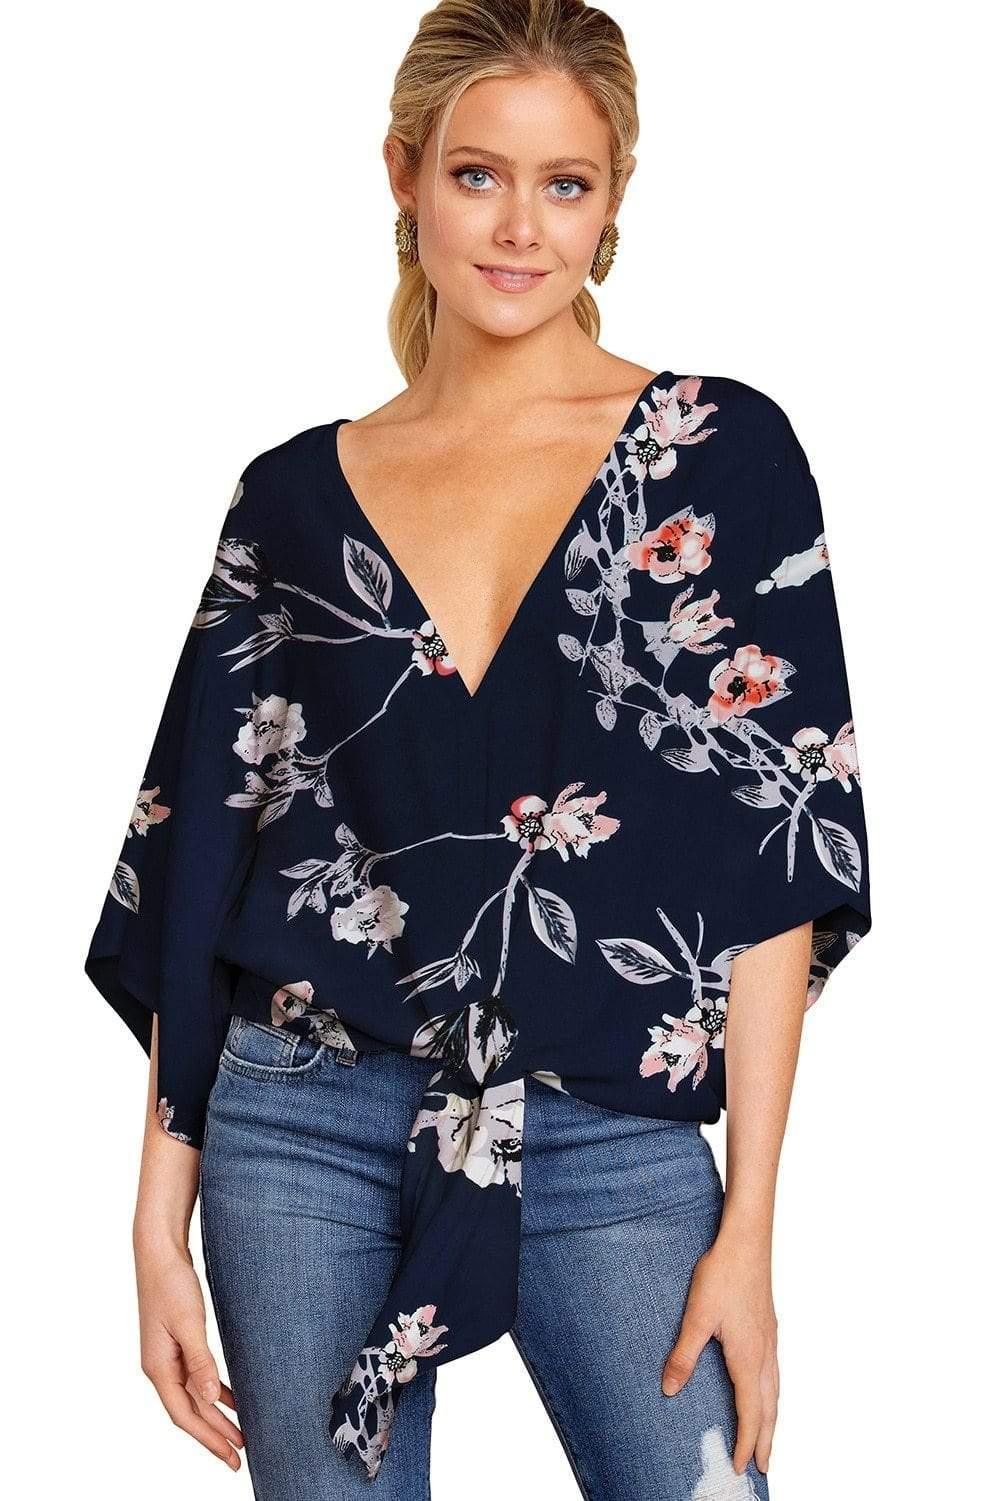 Fashion Knotted Blouse For Women - For Women USA